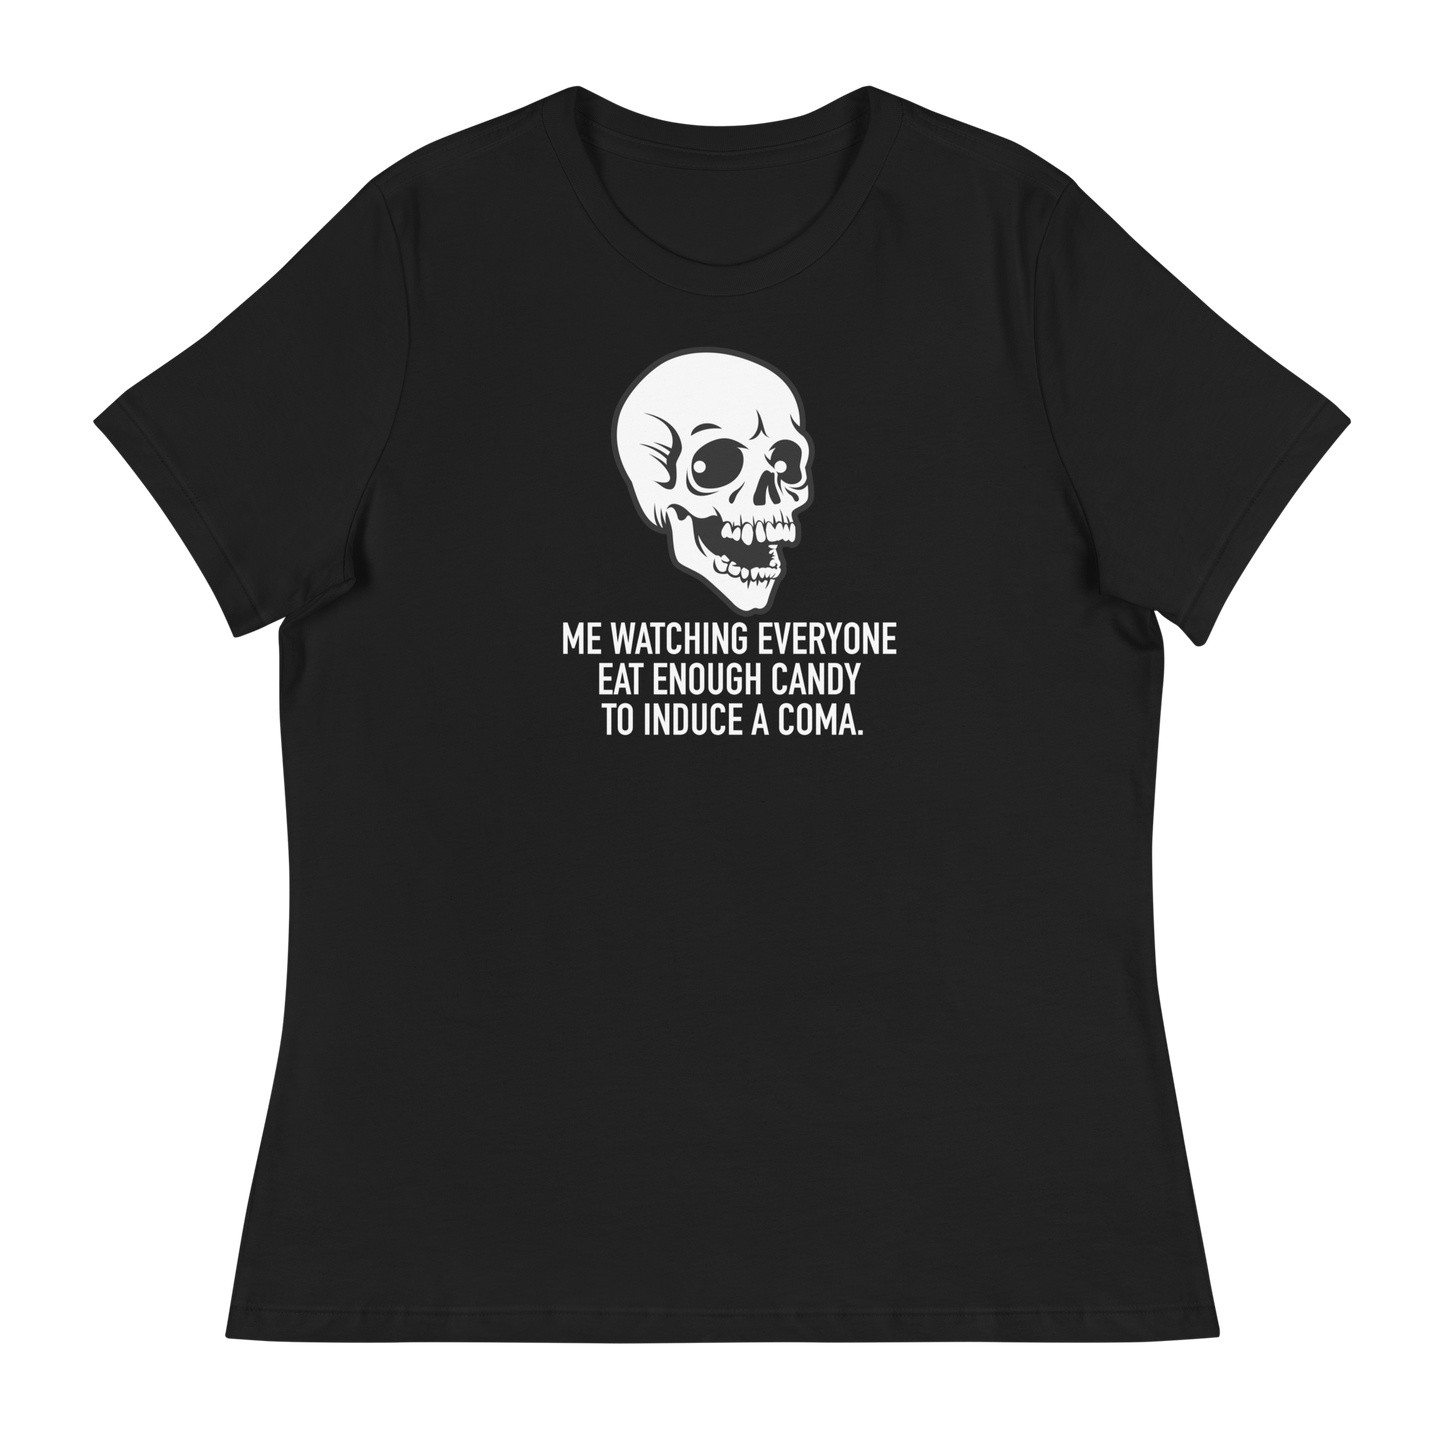 Women's - Halloween Skeleton Me Watching Everyone Eat Enough Candy to Induce a Coma - Funny T-Shirt